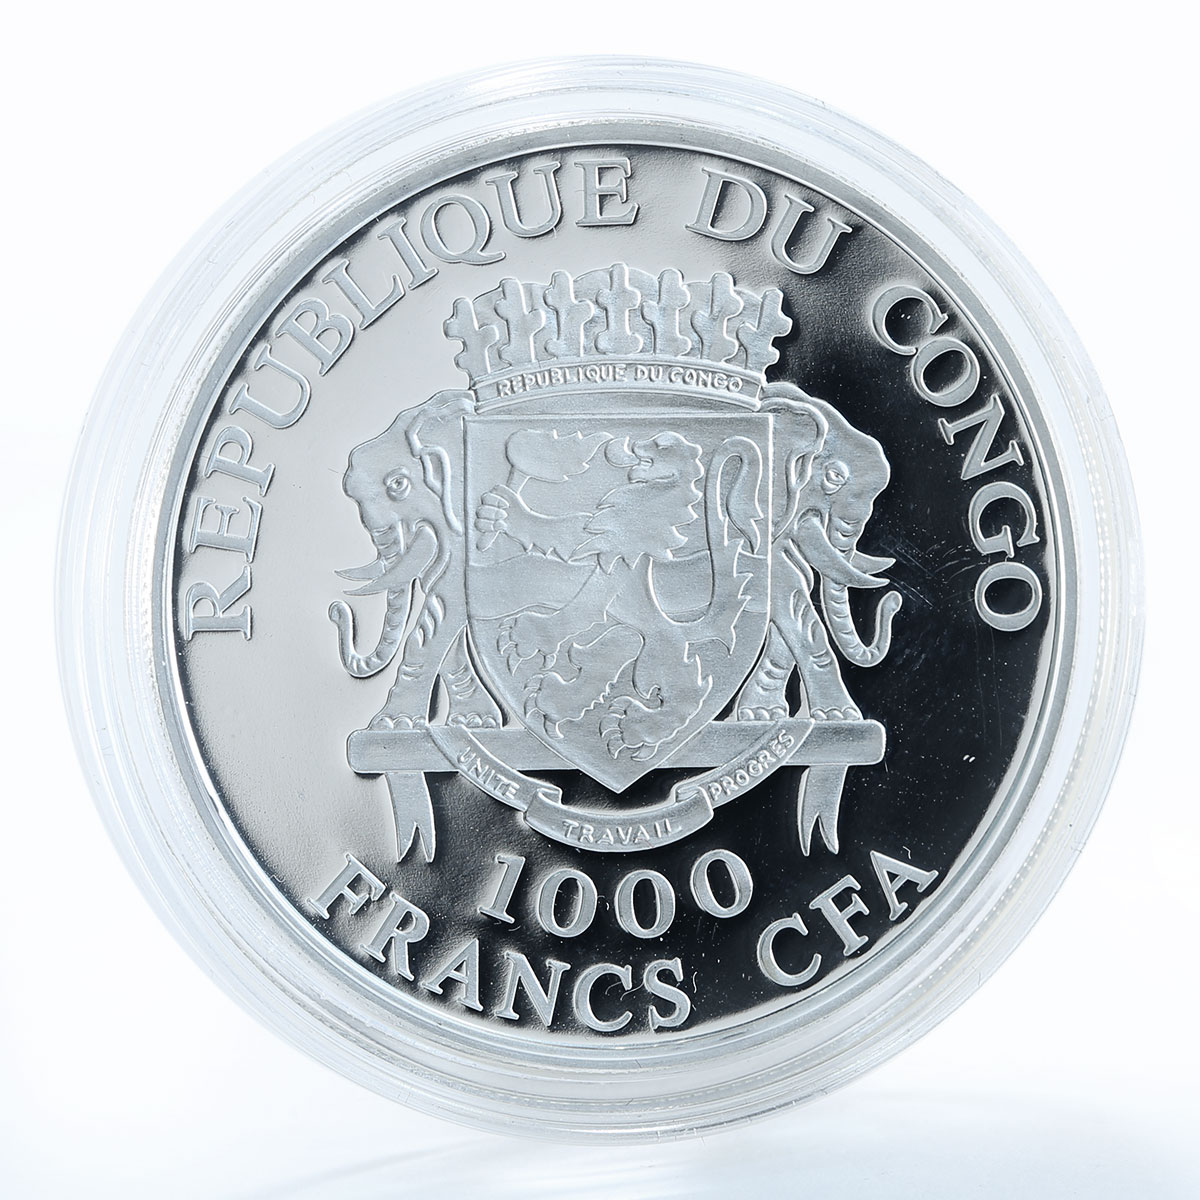 Congo 1000 francs Easter Christ is Rising religion silver coin 2011